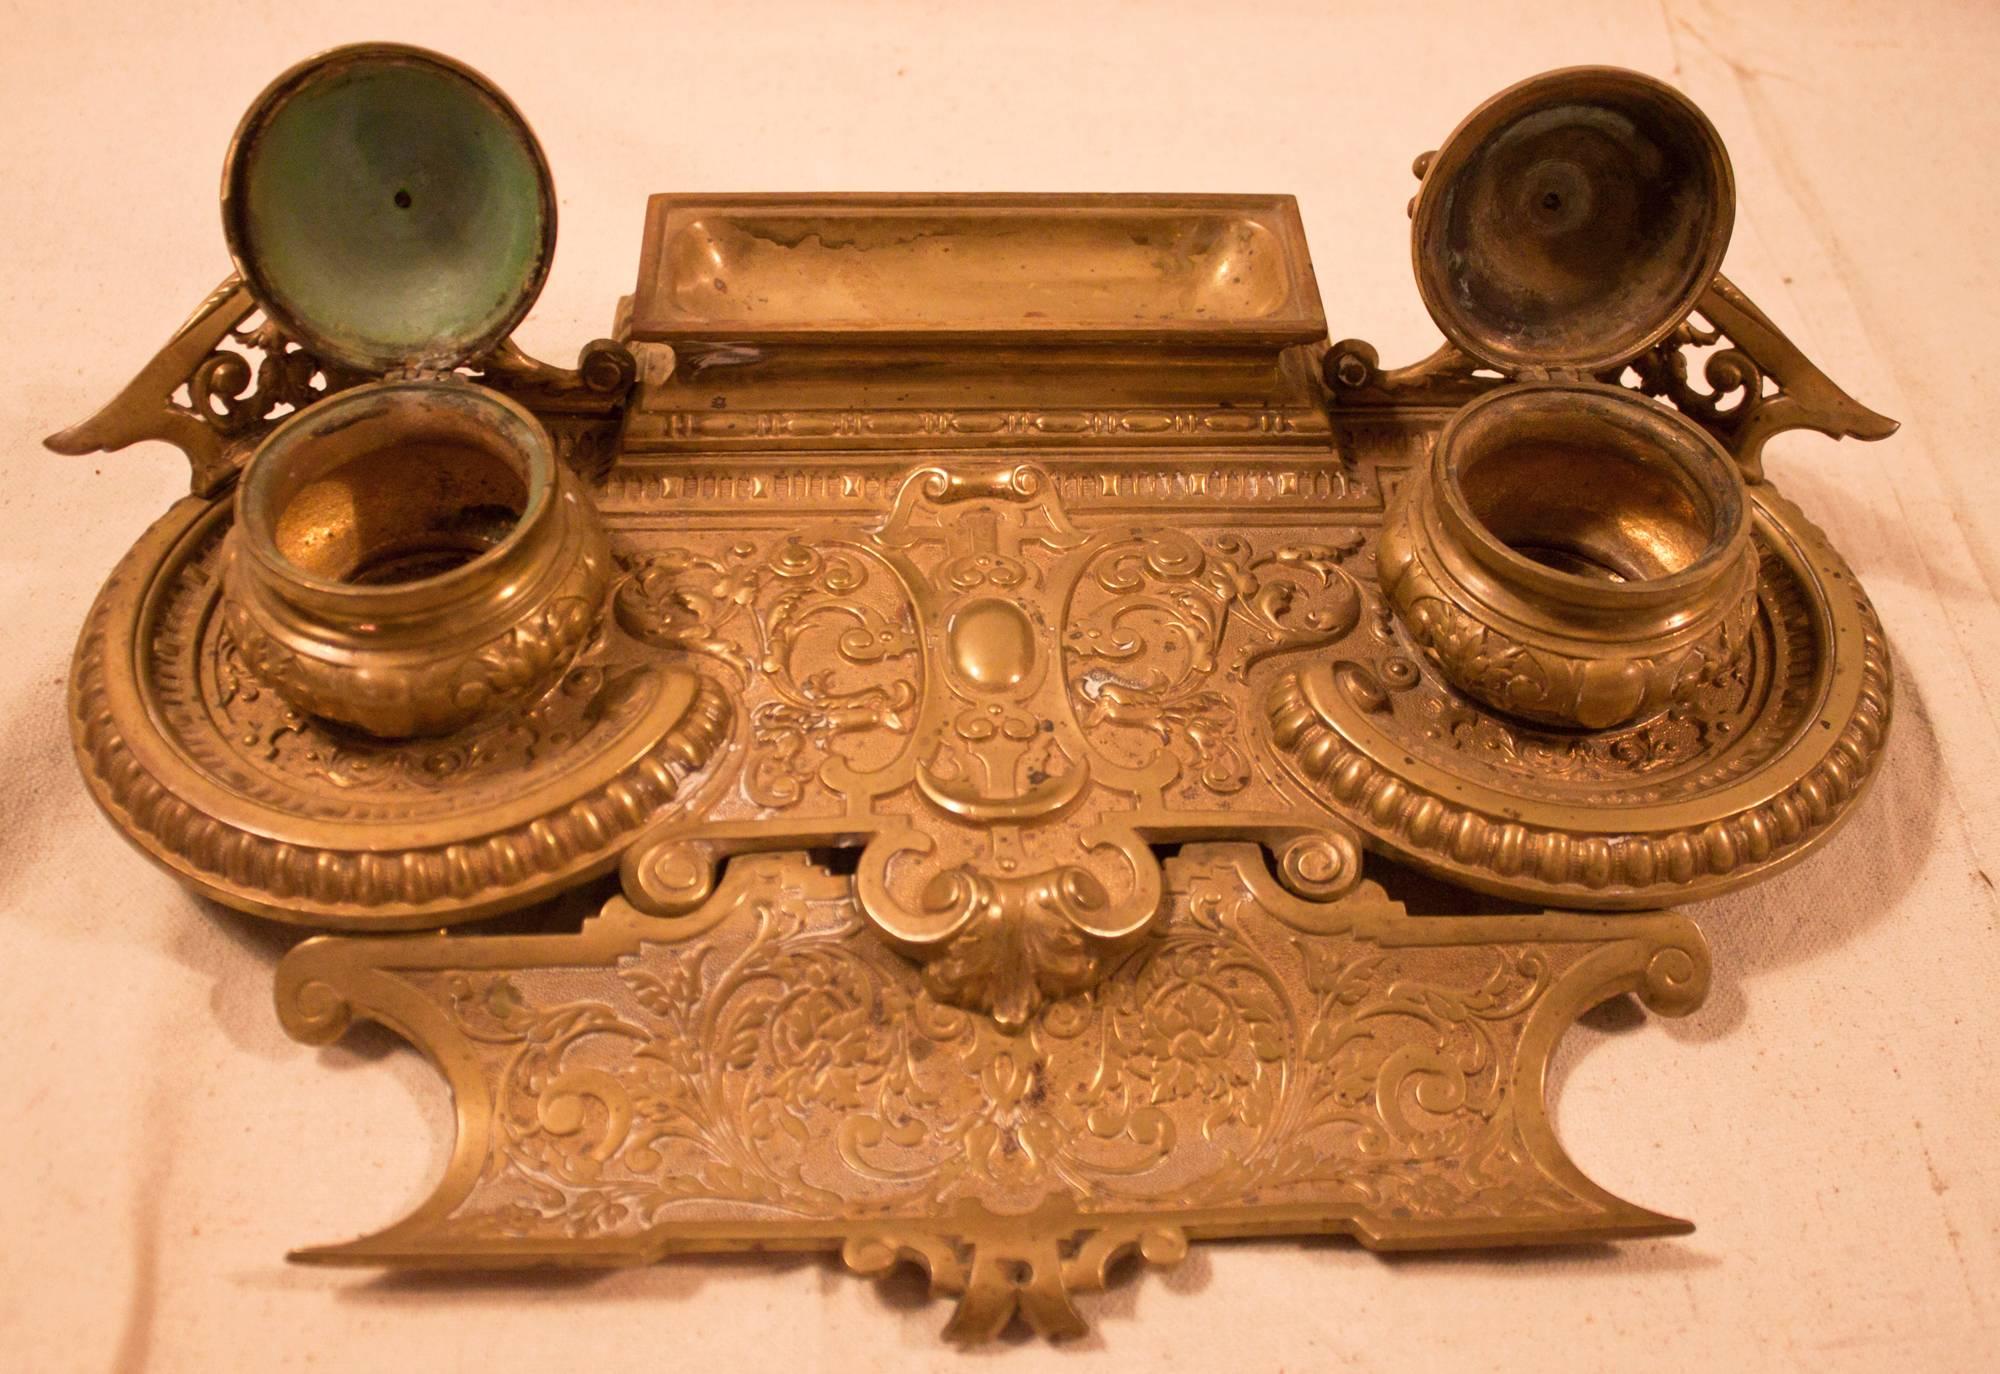 Bronze inkwell intricately embossed with scroll work. Features include a pen vest and back tray and double inkwells with griffins on the back gallery. A continental piece possibly Austrian or German made for the French market with very detailed and